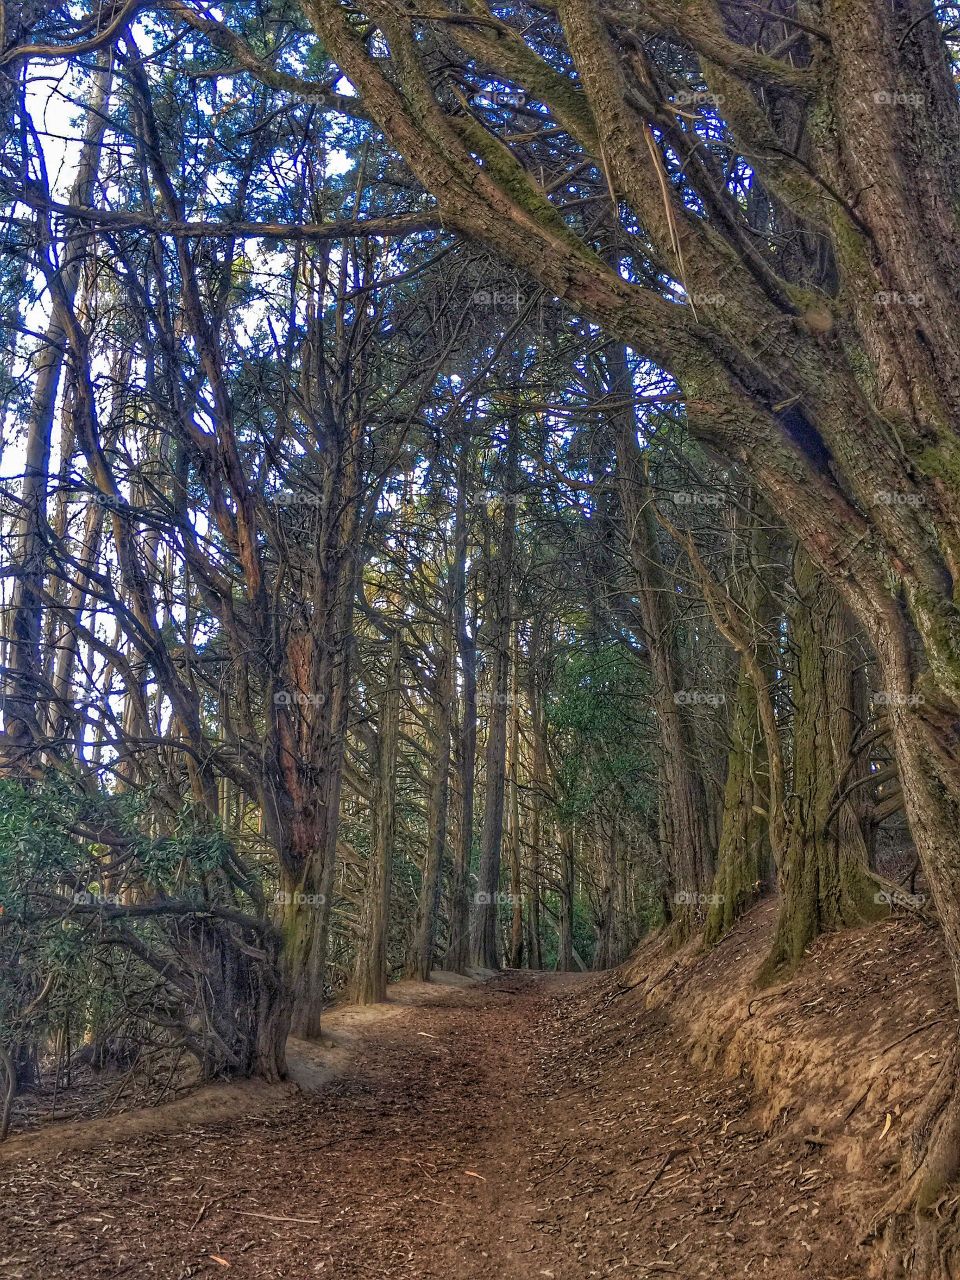 Serenity Trail . Hiking in the Redwood Regional Park, Oakland, Ca.